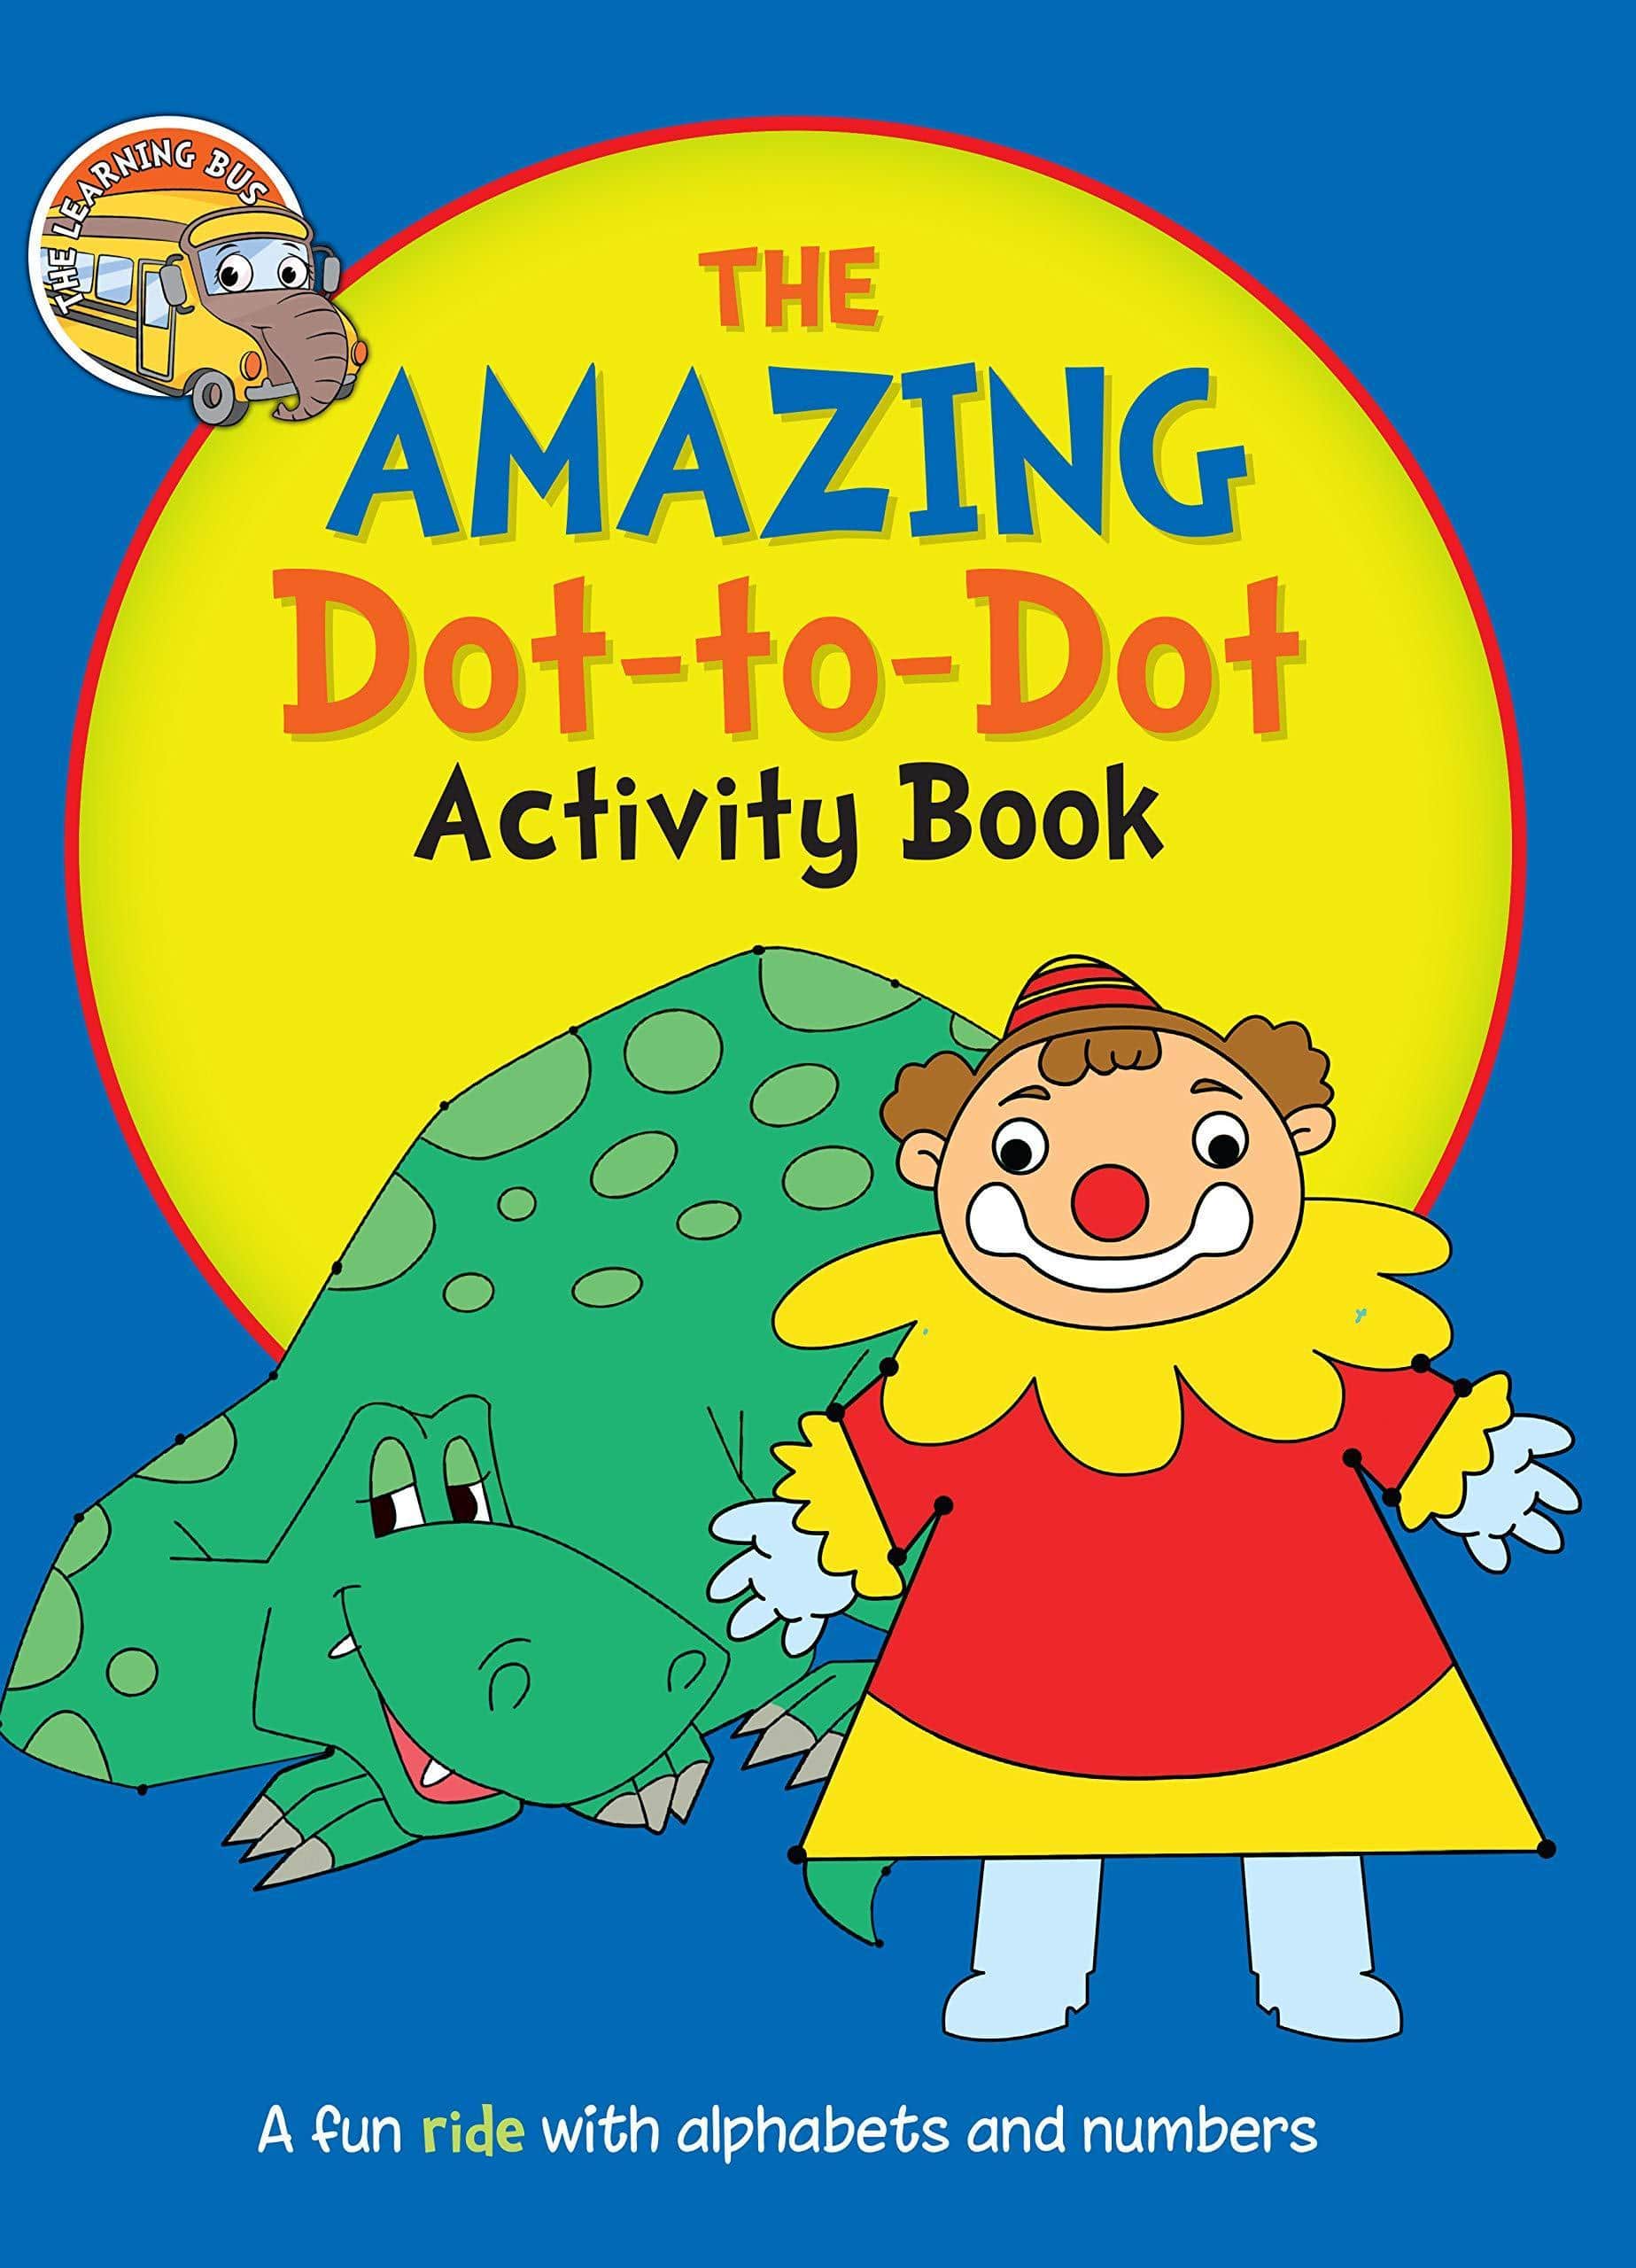 THE AMAZING DOT TO DOT ACTIVITY BOOK